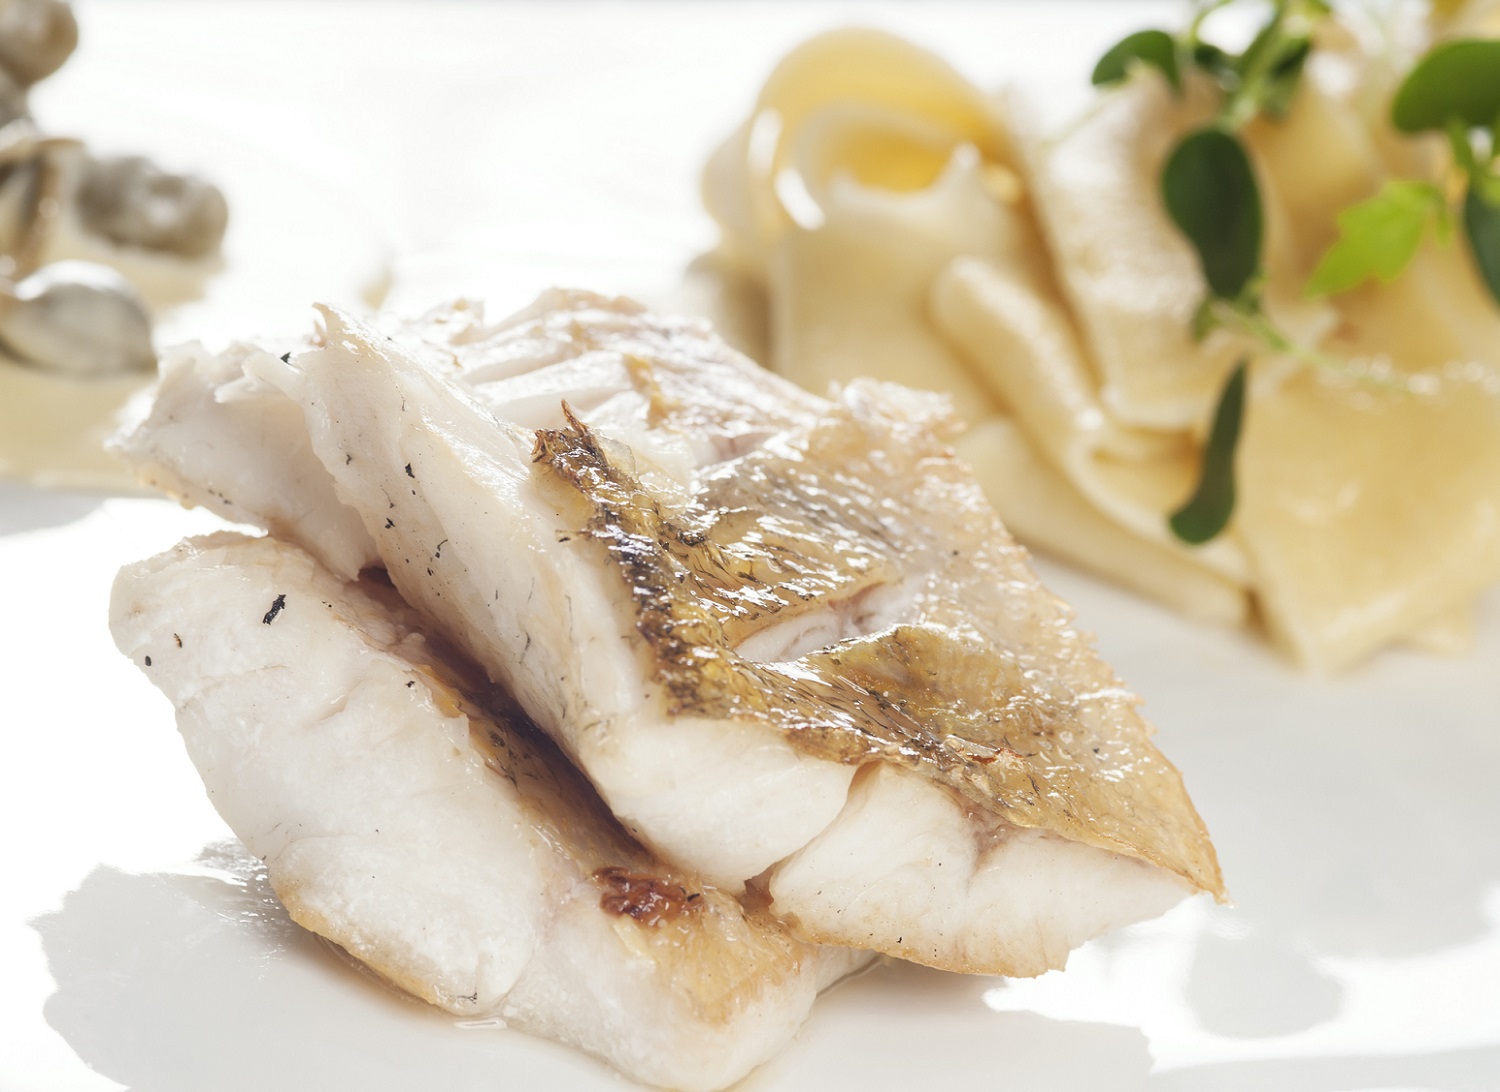 Baked walleye fillet with capers and served with tagliatelle. Shallow dof.